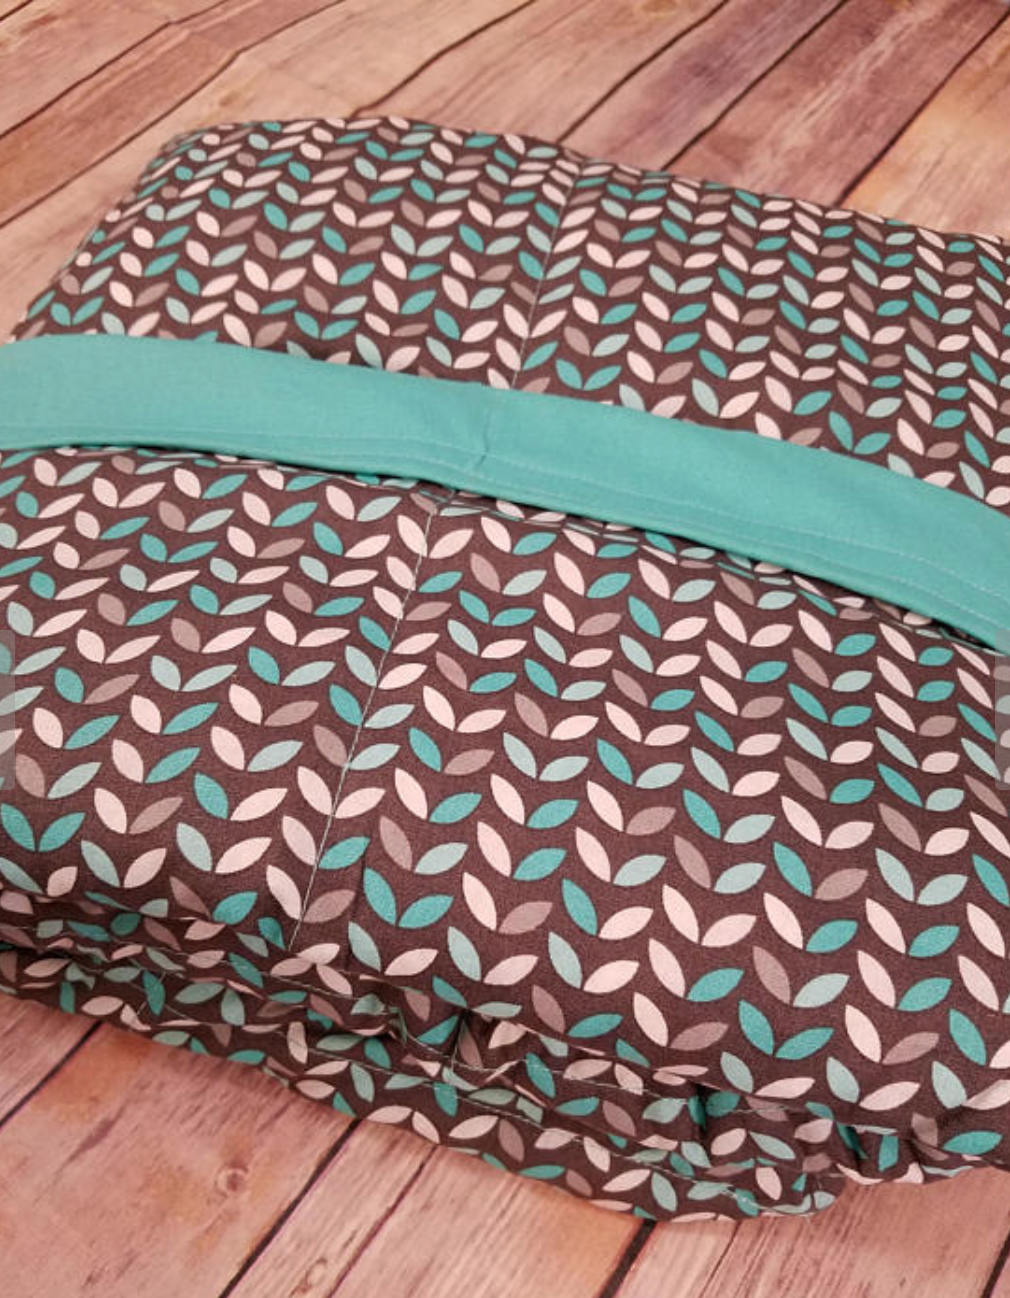 Weighted Blanket, 20 Pound, Mint and Gray, 40x70, READY TO SHIP, Twin